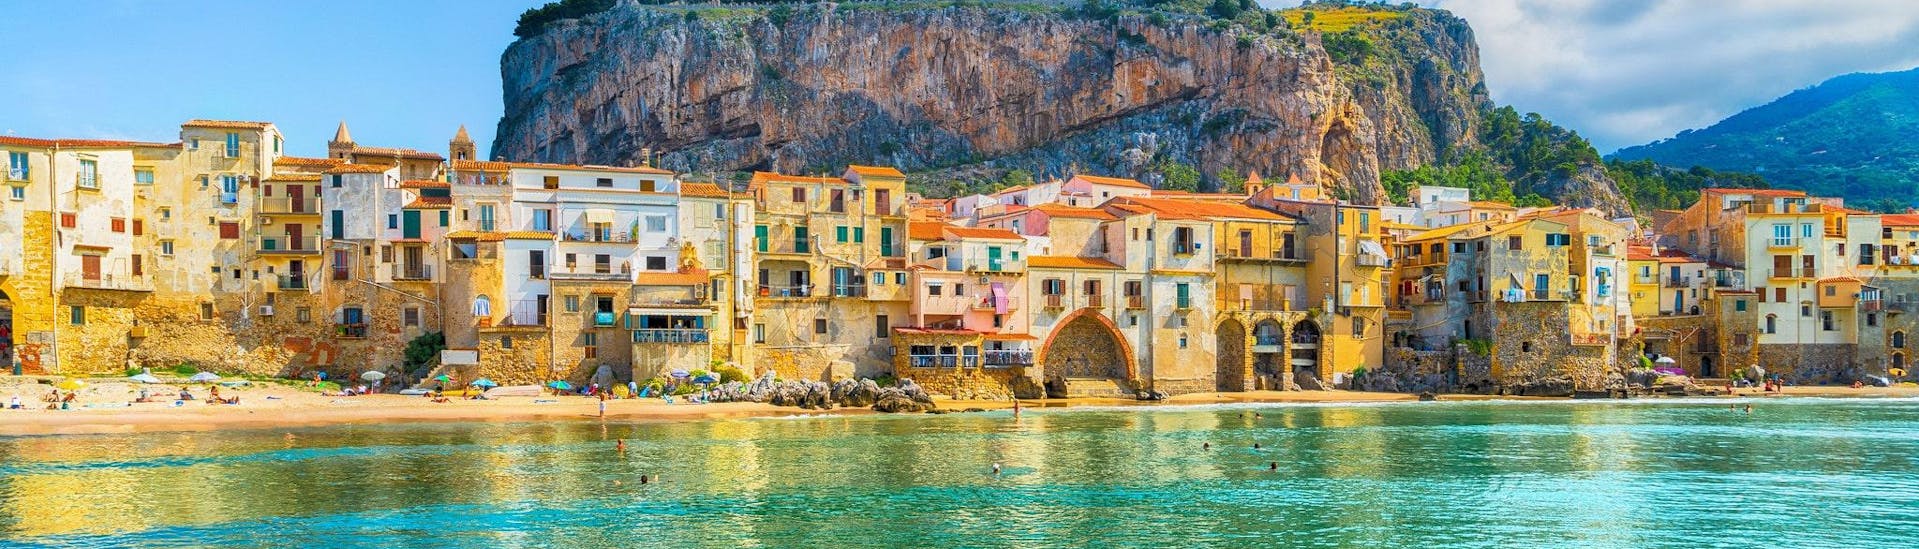 During a boat trip in Cefalù, Sicily, you can admire the mediaval village from the water.